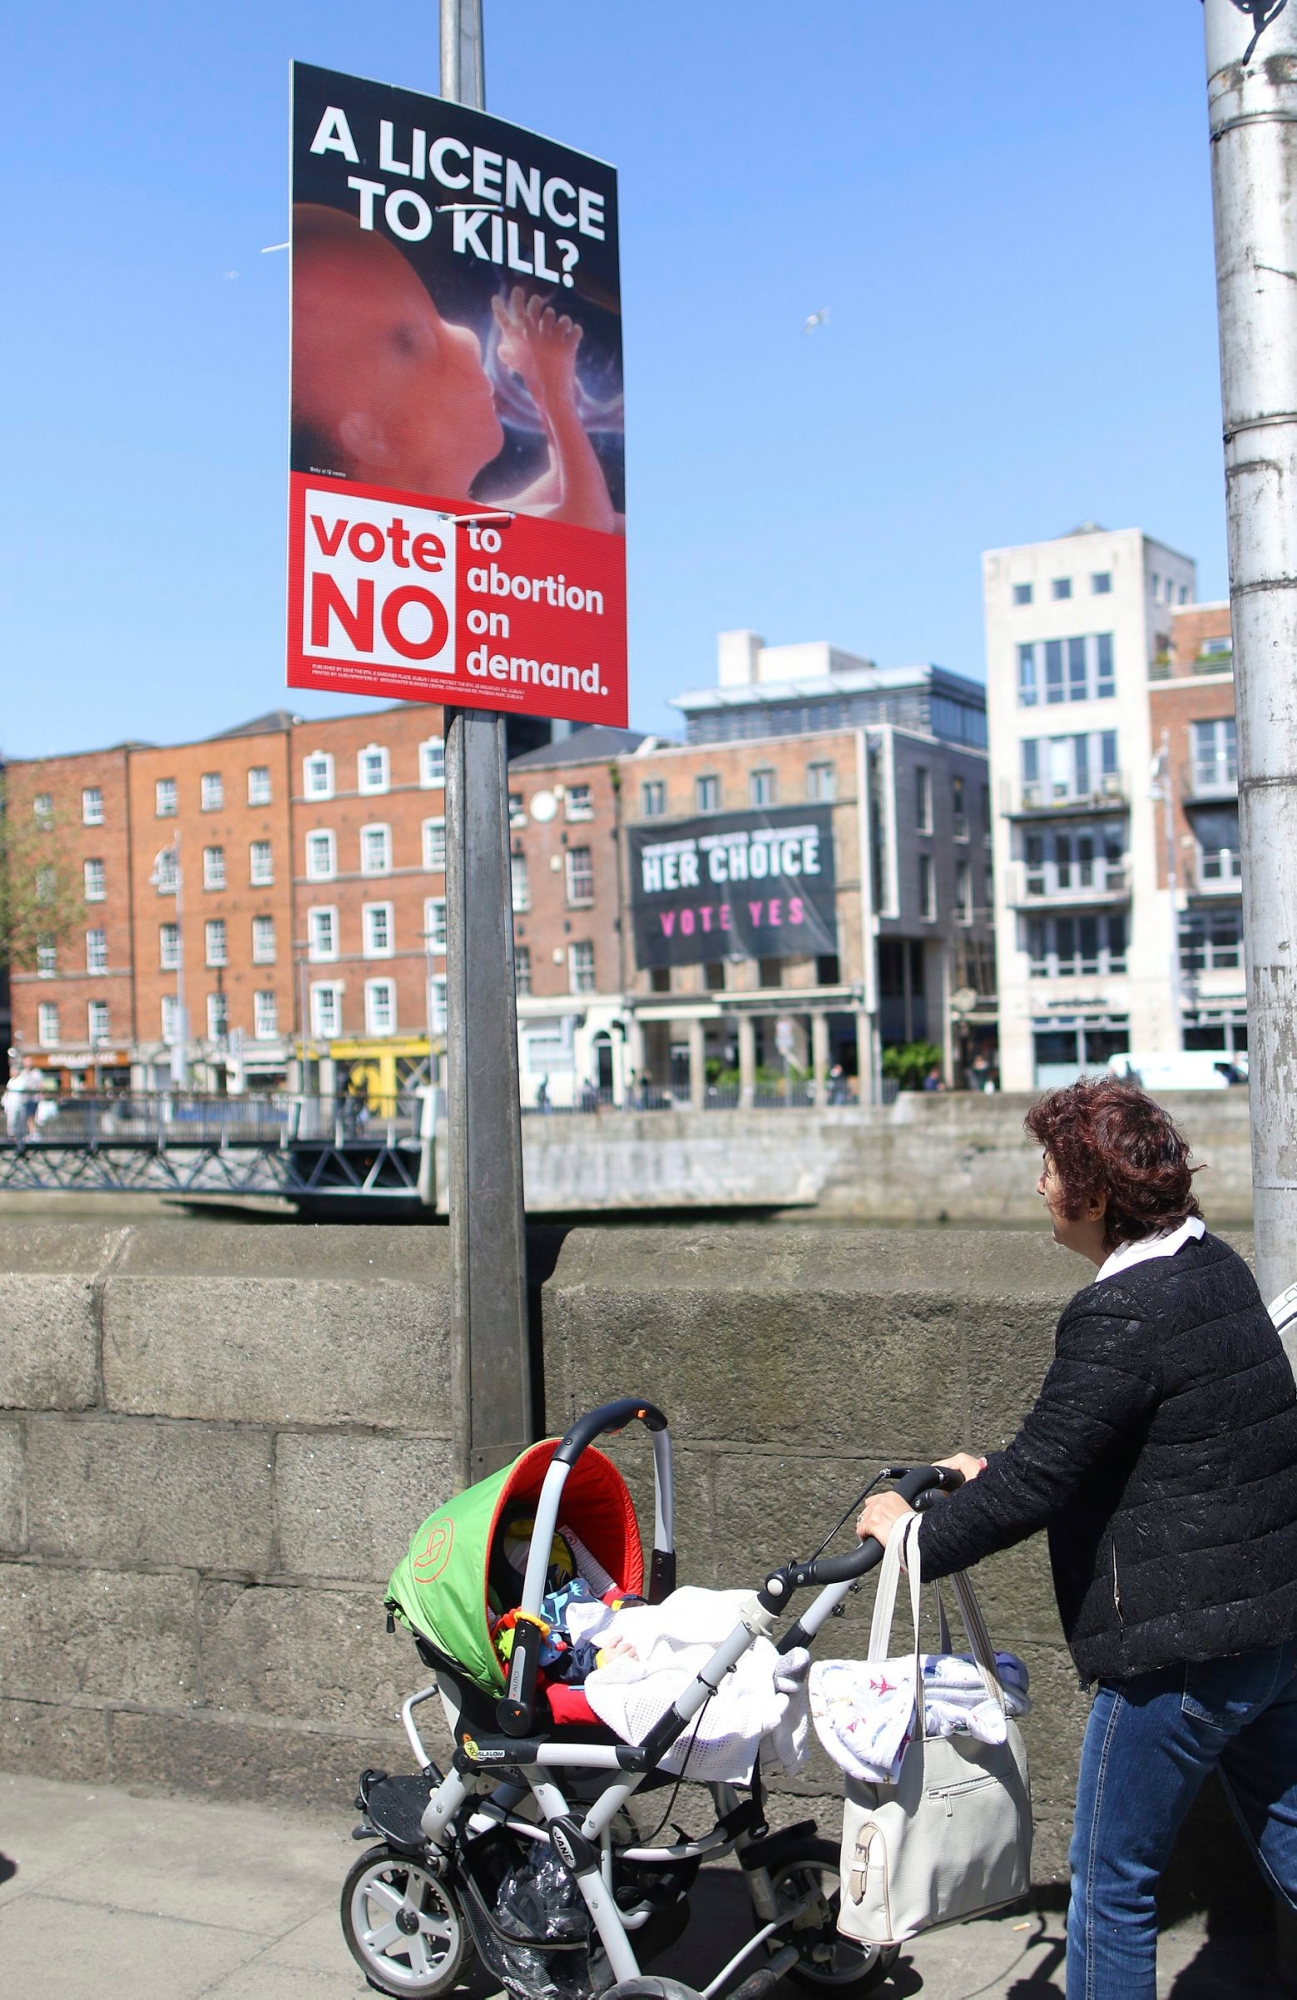 In this photo taken on May 17, 2018,  a woman pushing a pram walks by an anti-abortion poster hung on a lamppost, in Dublin, Ireland. In homes and pubs, on leaflets and lampposts, debate rages in Ireland over whether to lift the country's decades-old ban on abortion. Pro-repeal banners declare: "Her choice: vote yes." Anti-abortion placards warn against a "license to kill." Online, the argument is just as charged _ and more shadowy _ as unregulated ads of uncertain origin battle to sway voters ahead of Friday's referendum, which could give Irish women the right to end their pregnancies for the first time.  (AP Photo/Peter Morrison) Ireland Abortion